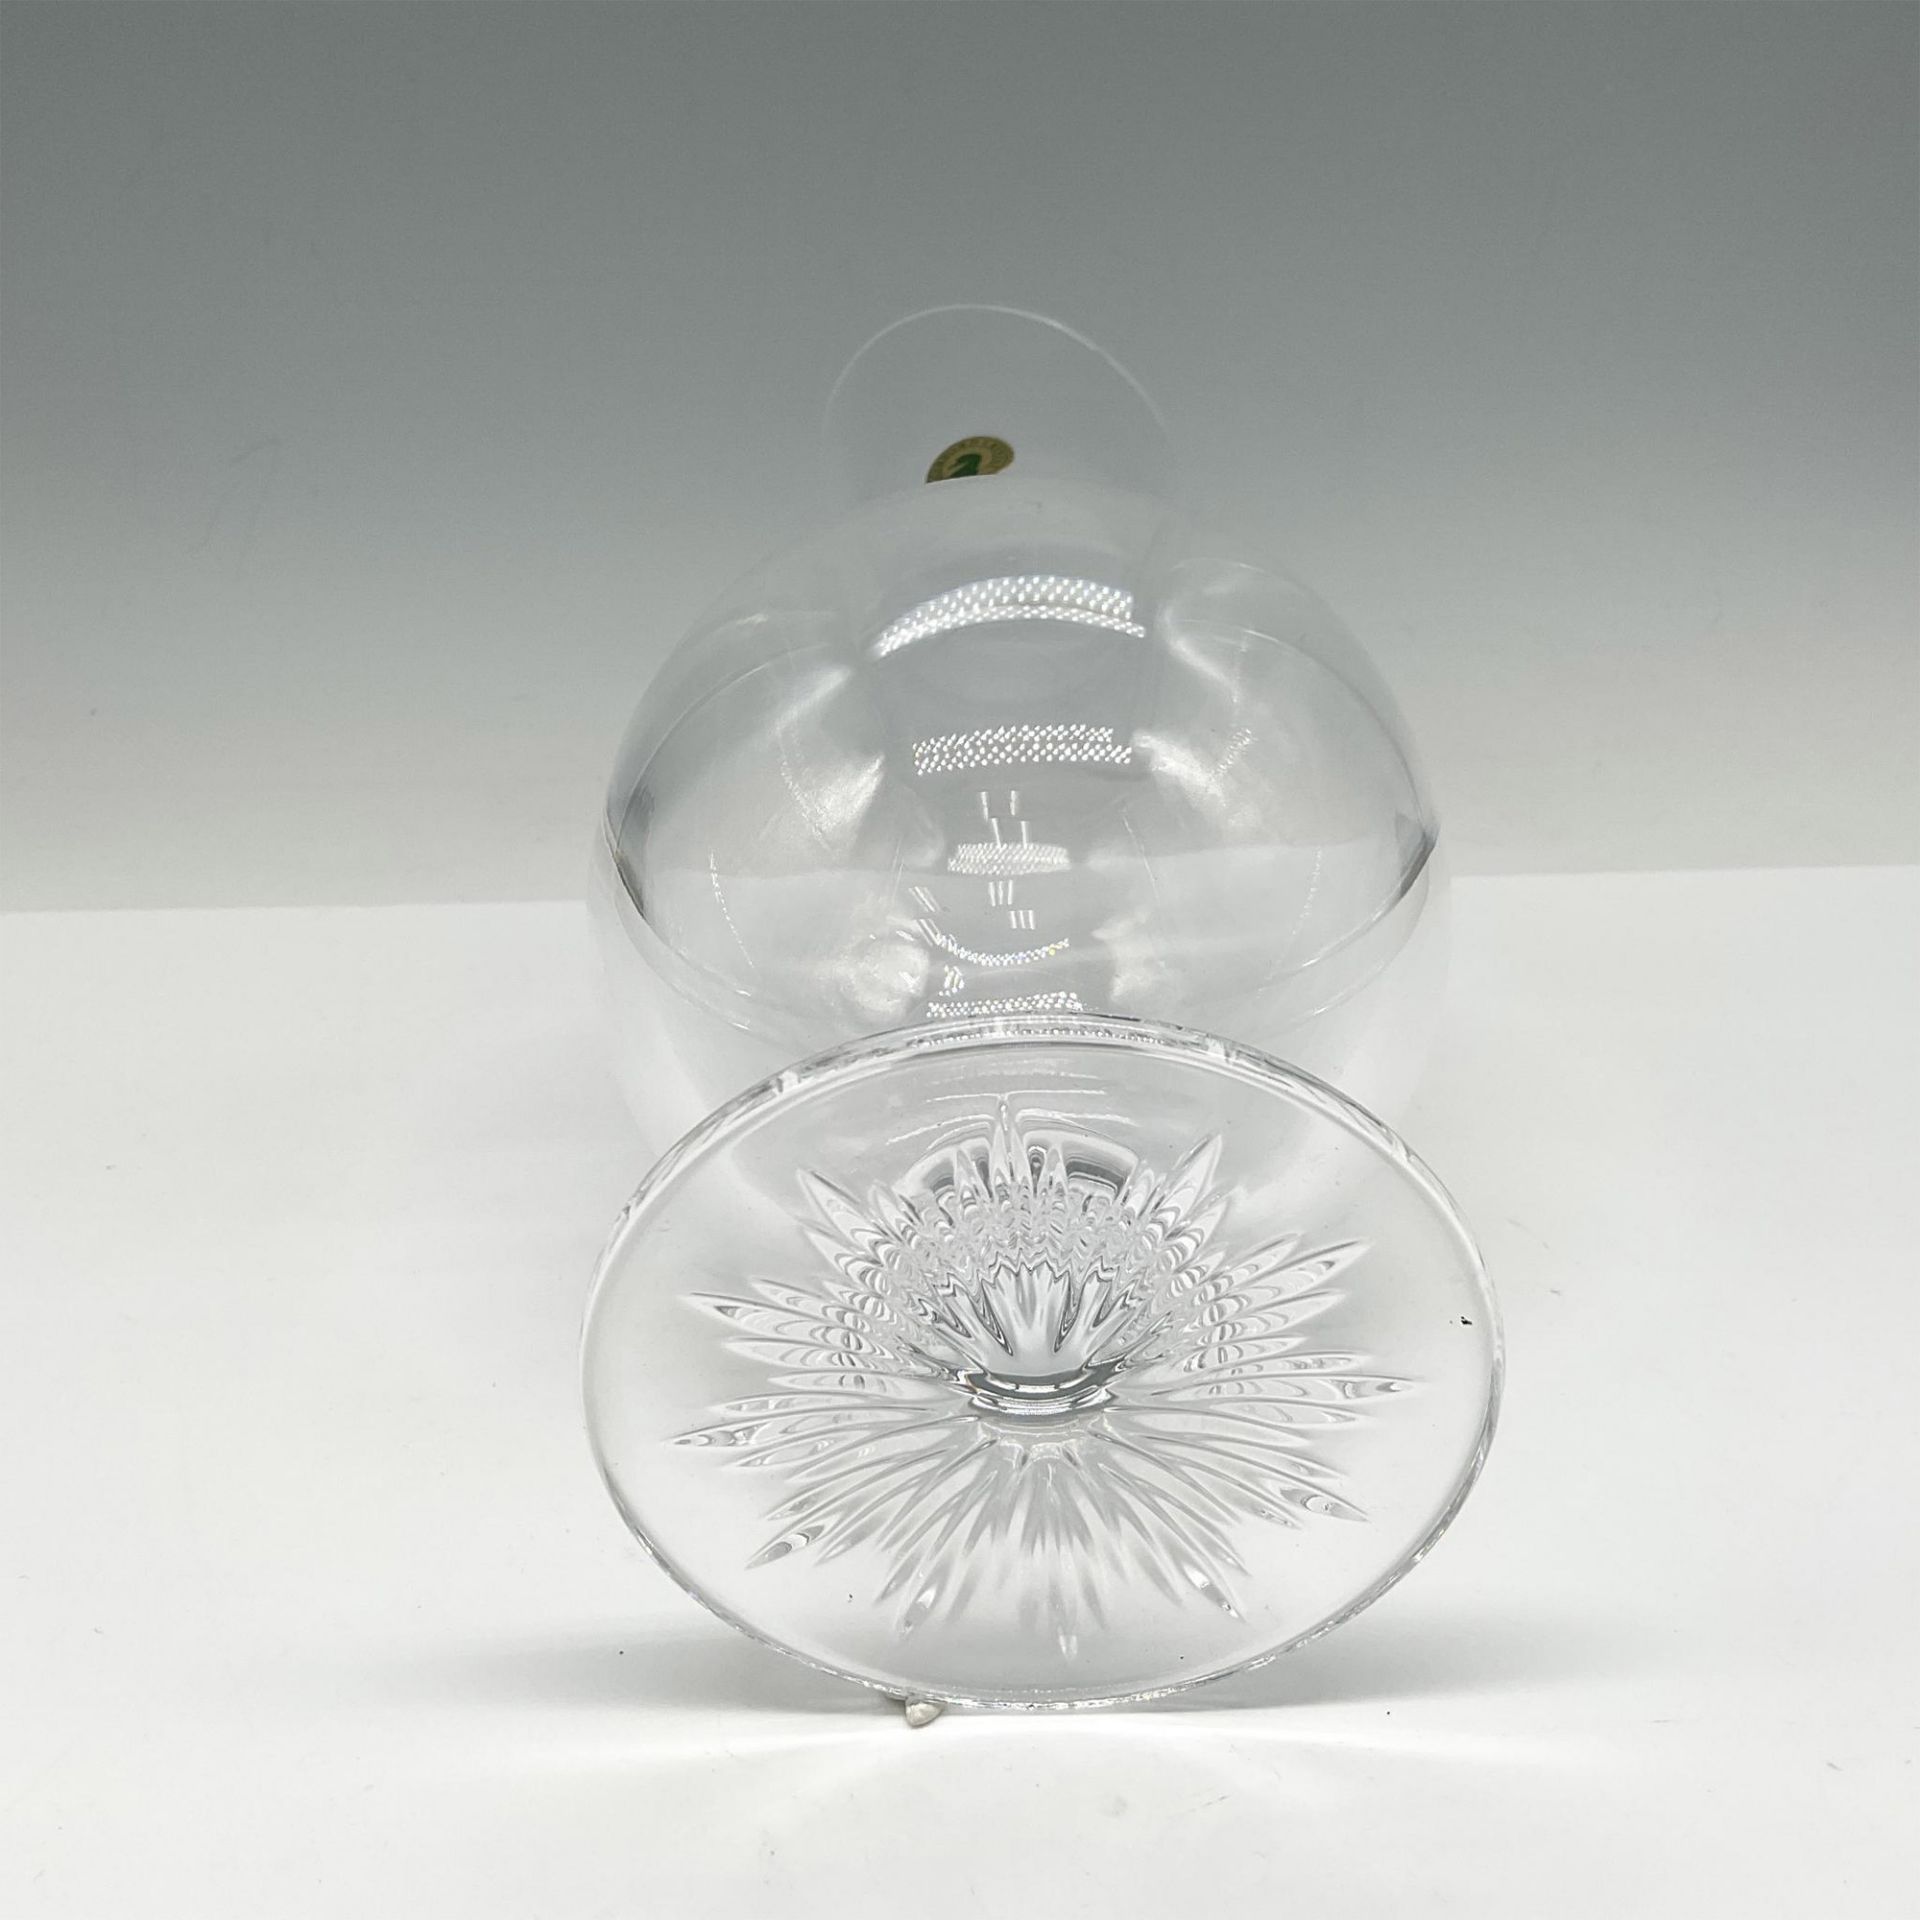 Waterford Crystal Footed Carafe - Image 3 of 3